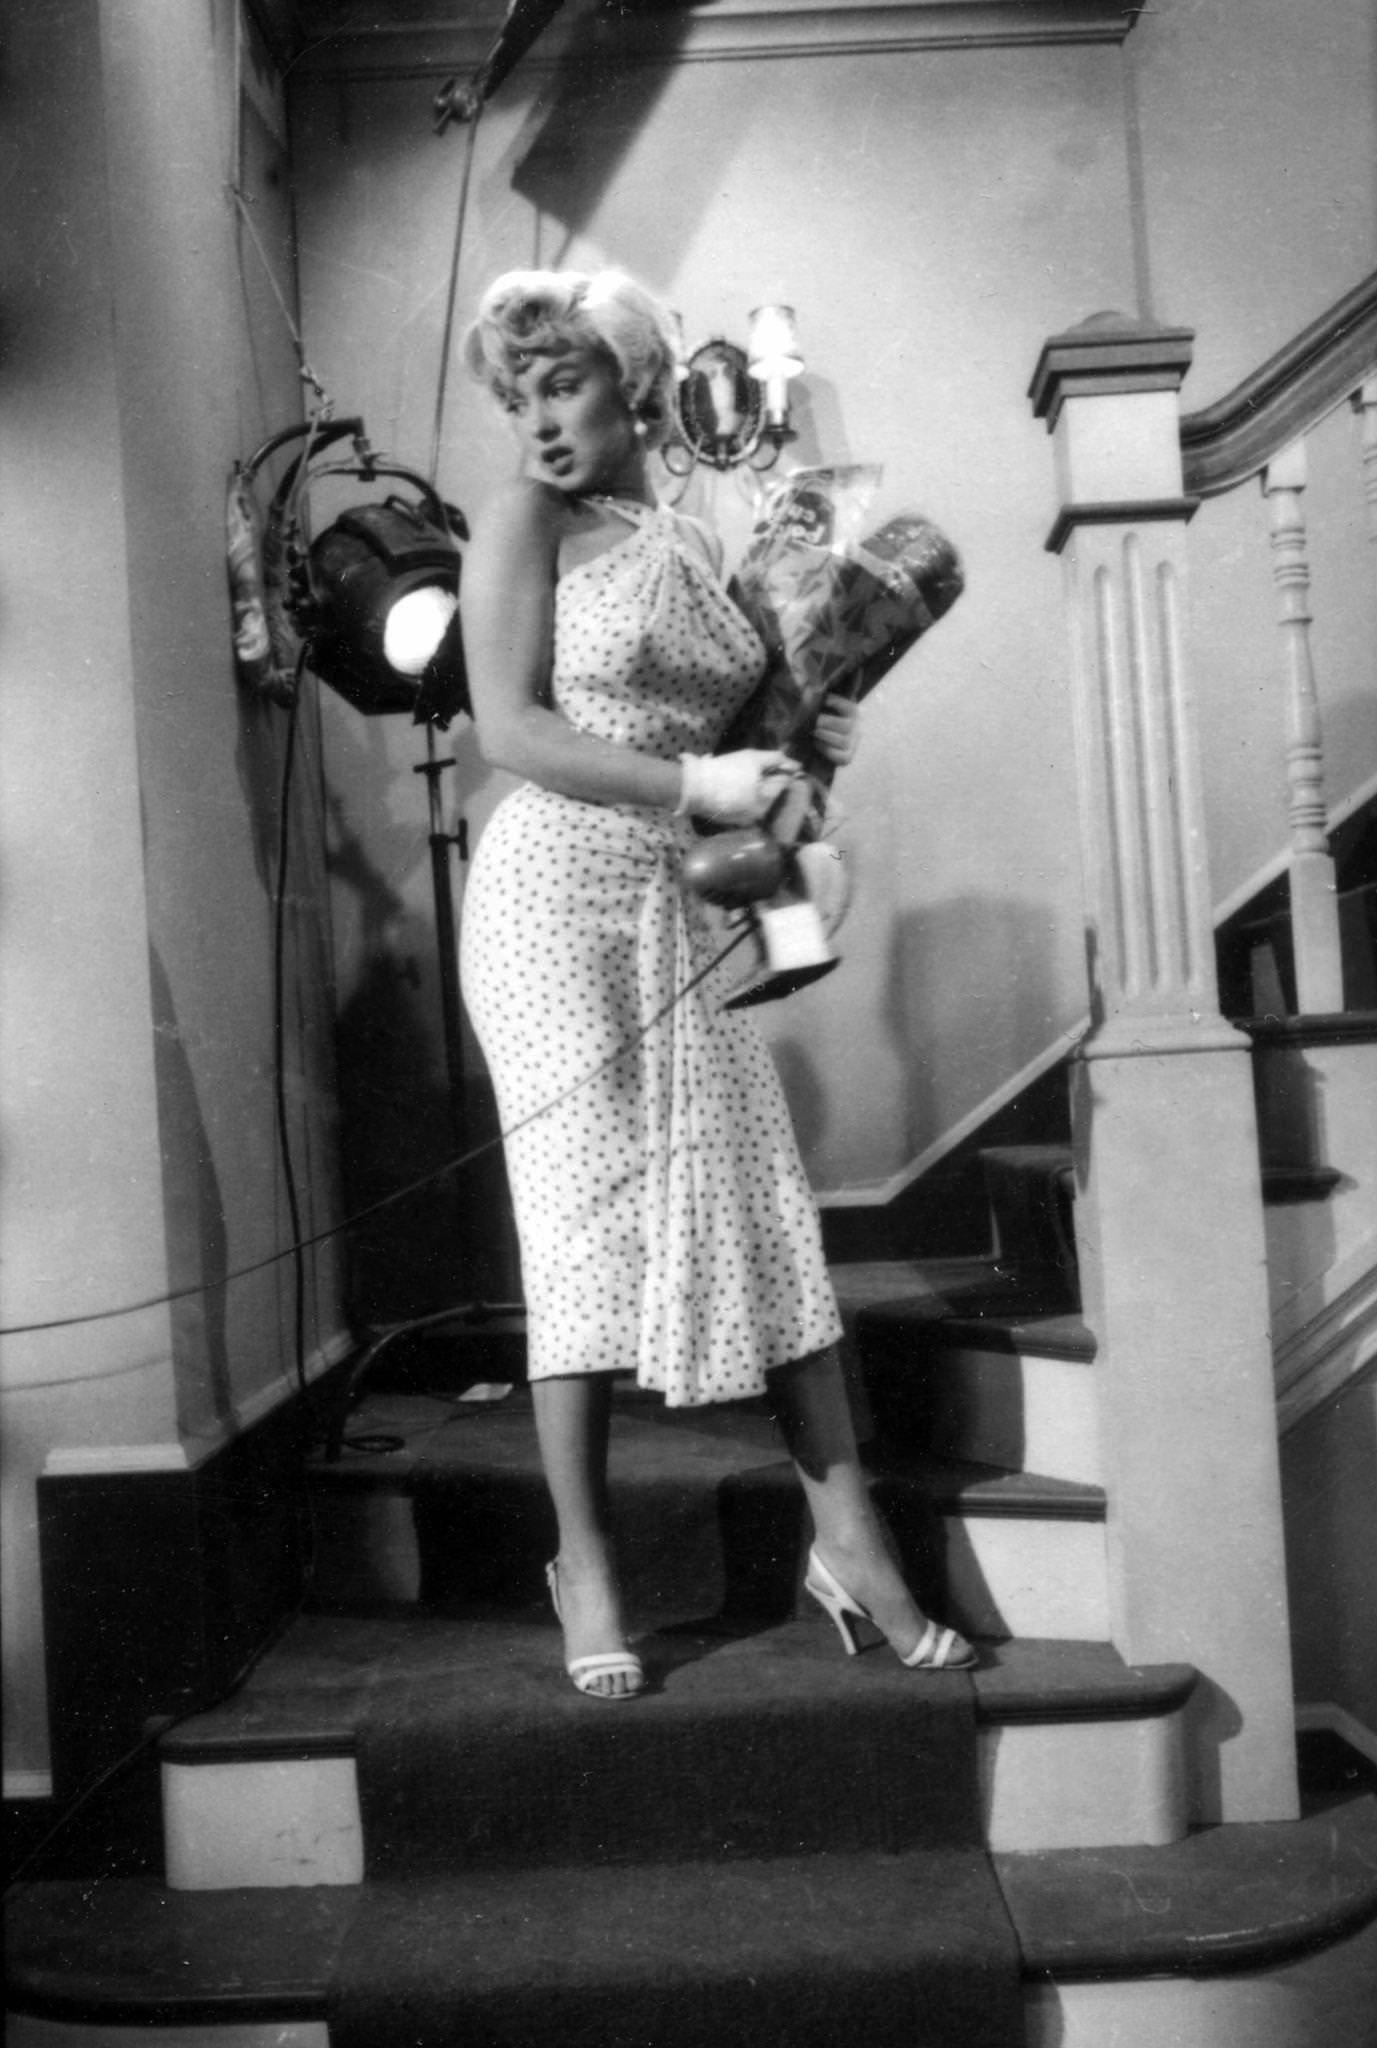 Marilyn Monroe, wearing a polka-dot dress, ascends a staircase holding a bag of groceries and a desk fan in her arms in 1954 during the filming of "The Seven Year Itch"